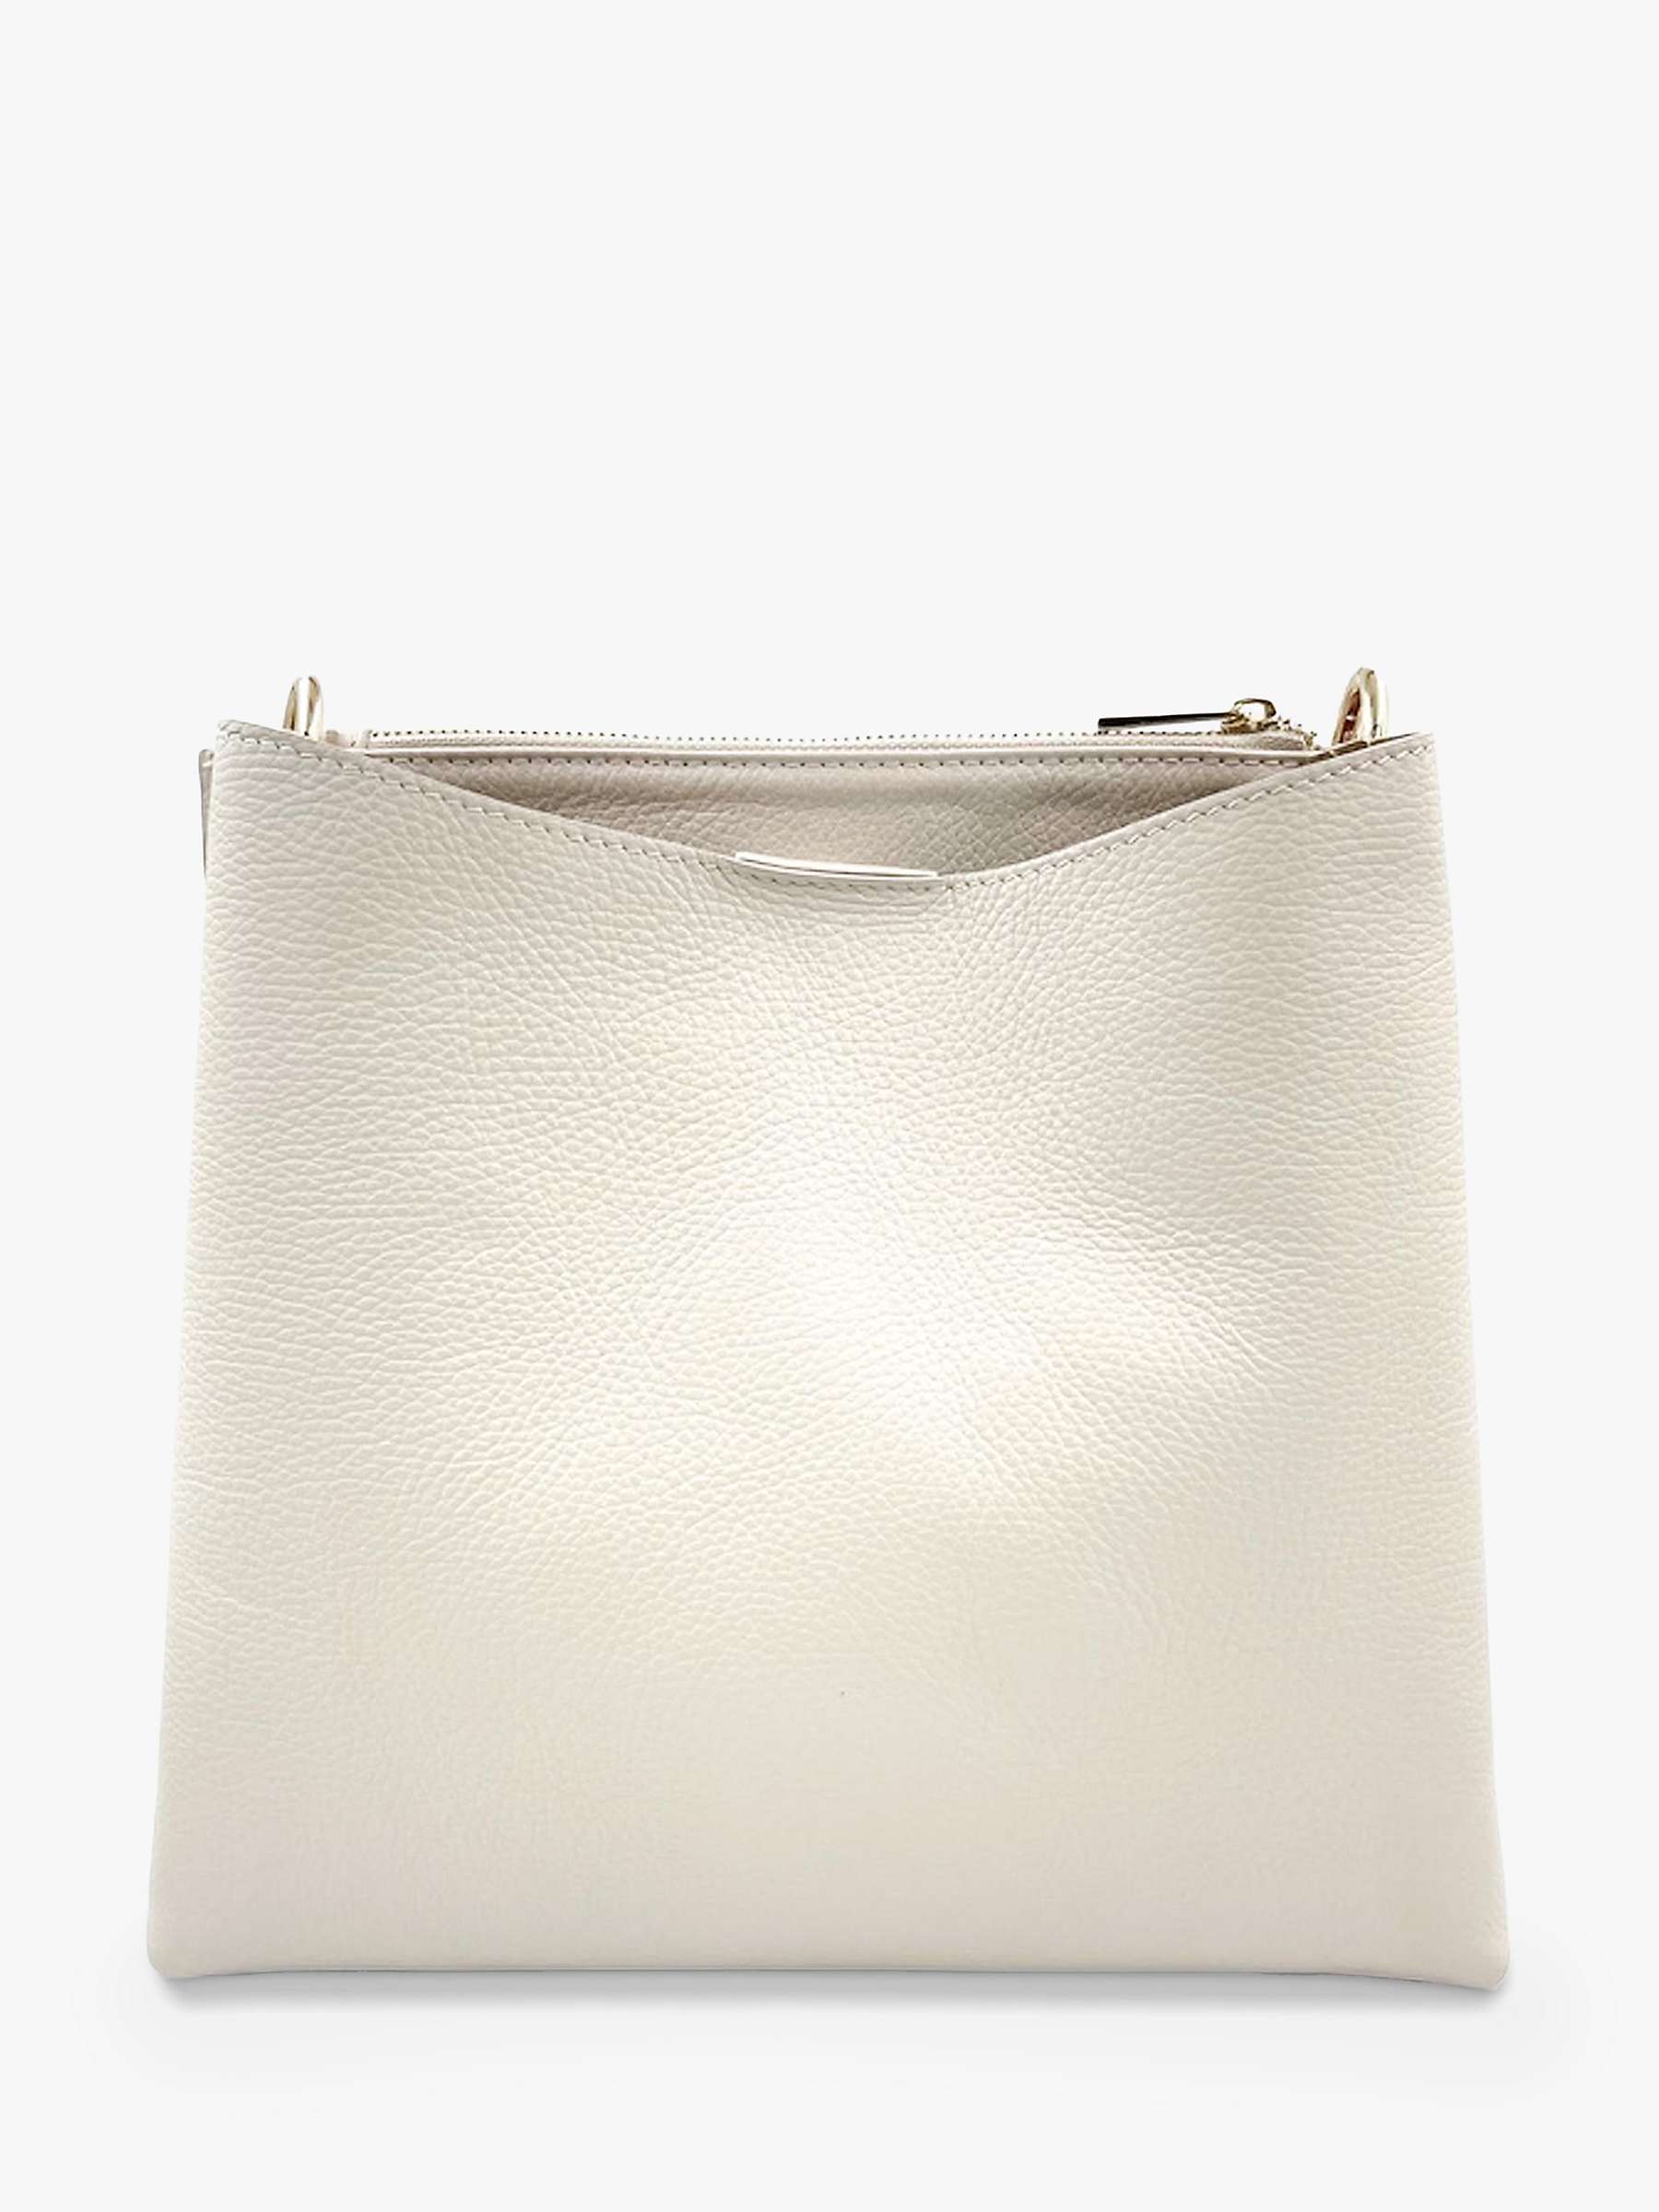 Buy Apatchy Leather Tote Bag Online at johnlewis.com